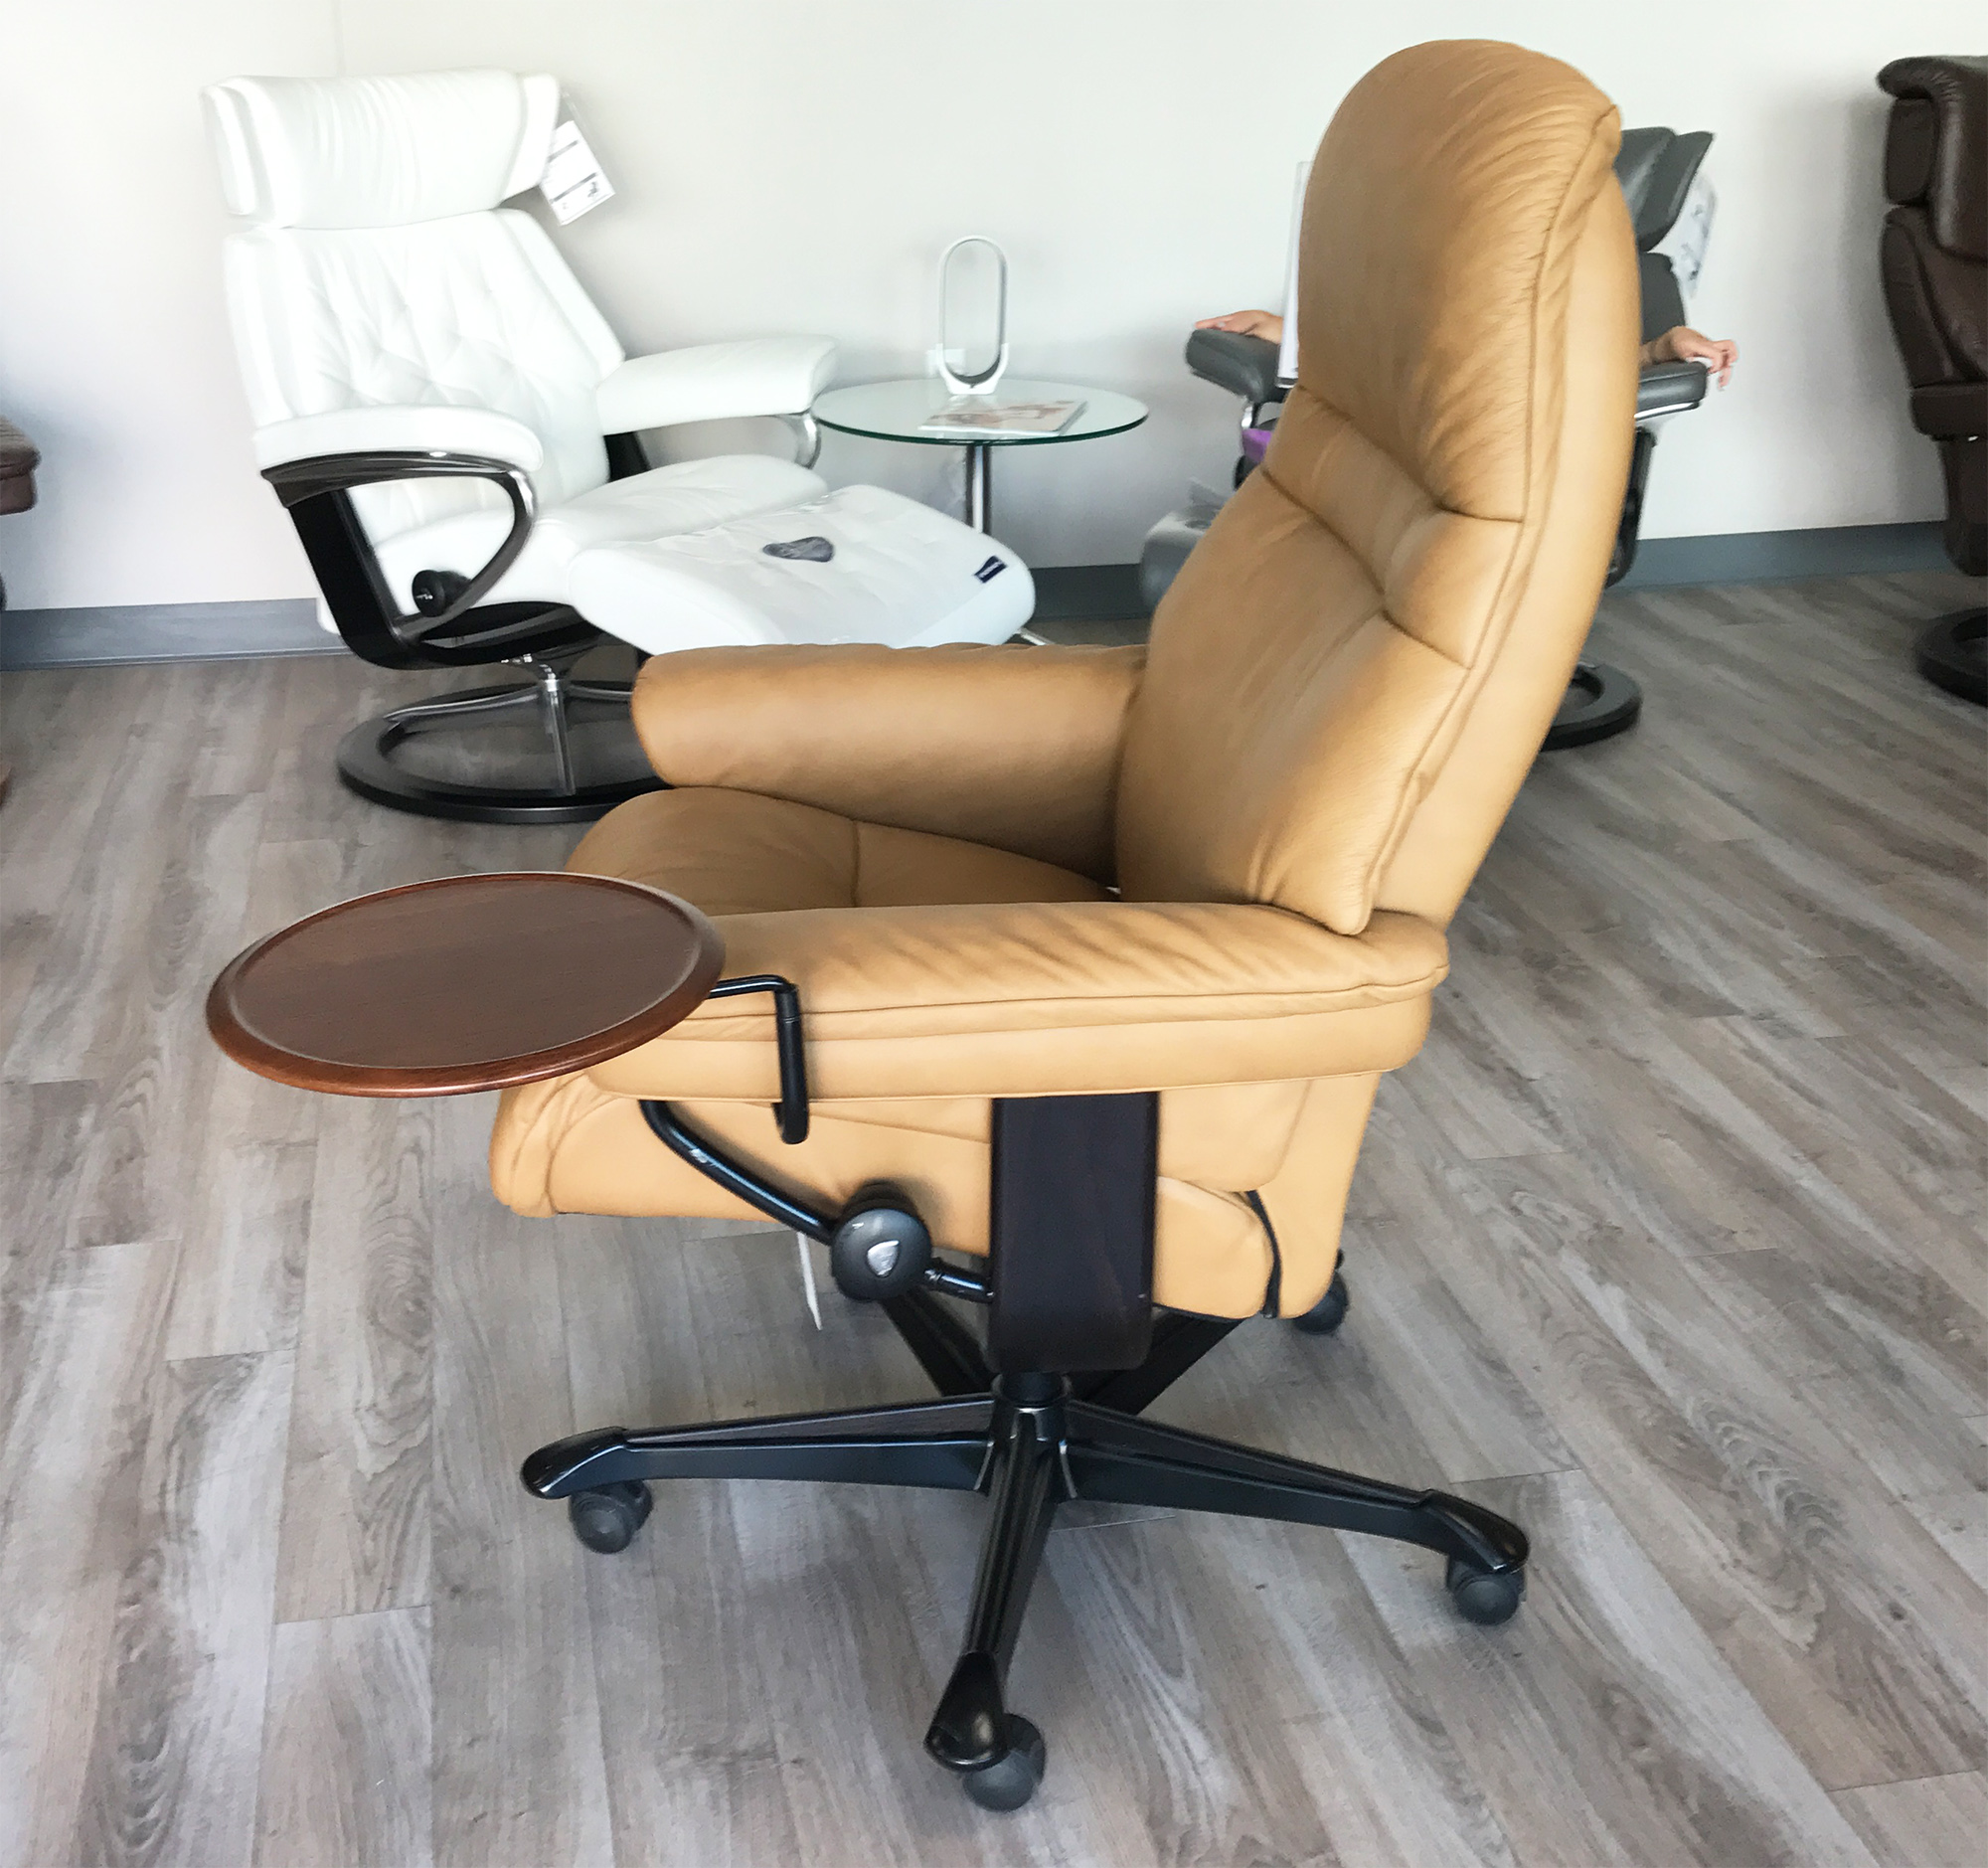 Stressless Sunrise Office Desk Chair Paloma Taupe Leather By